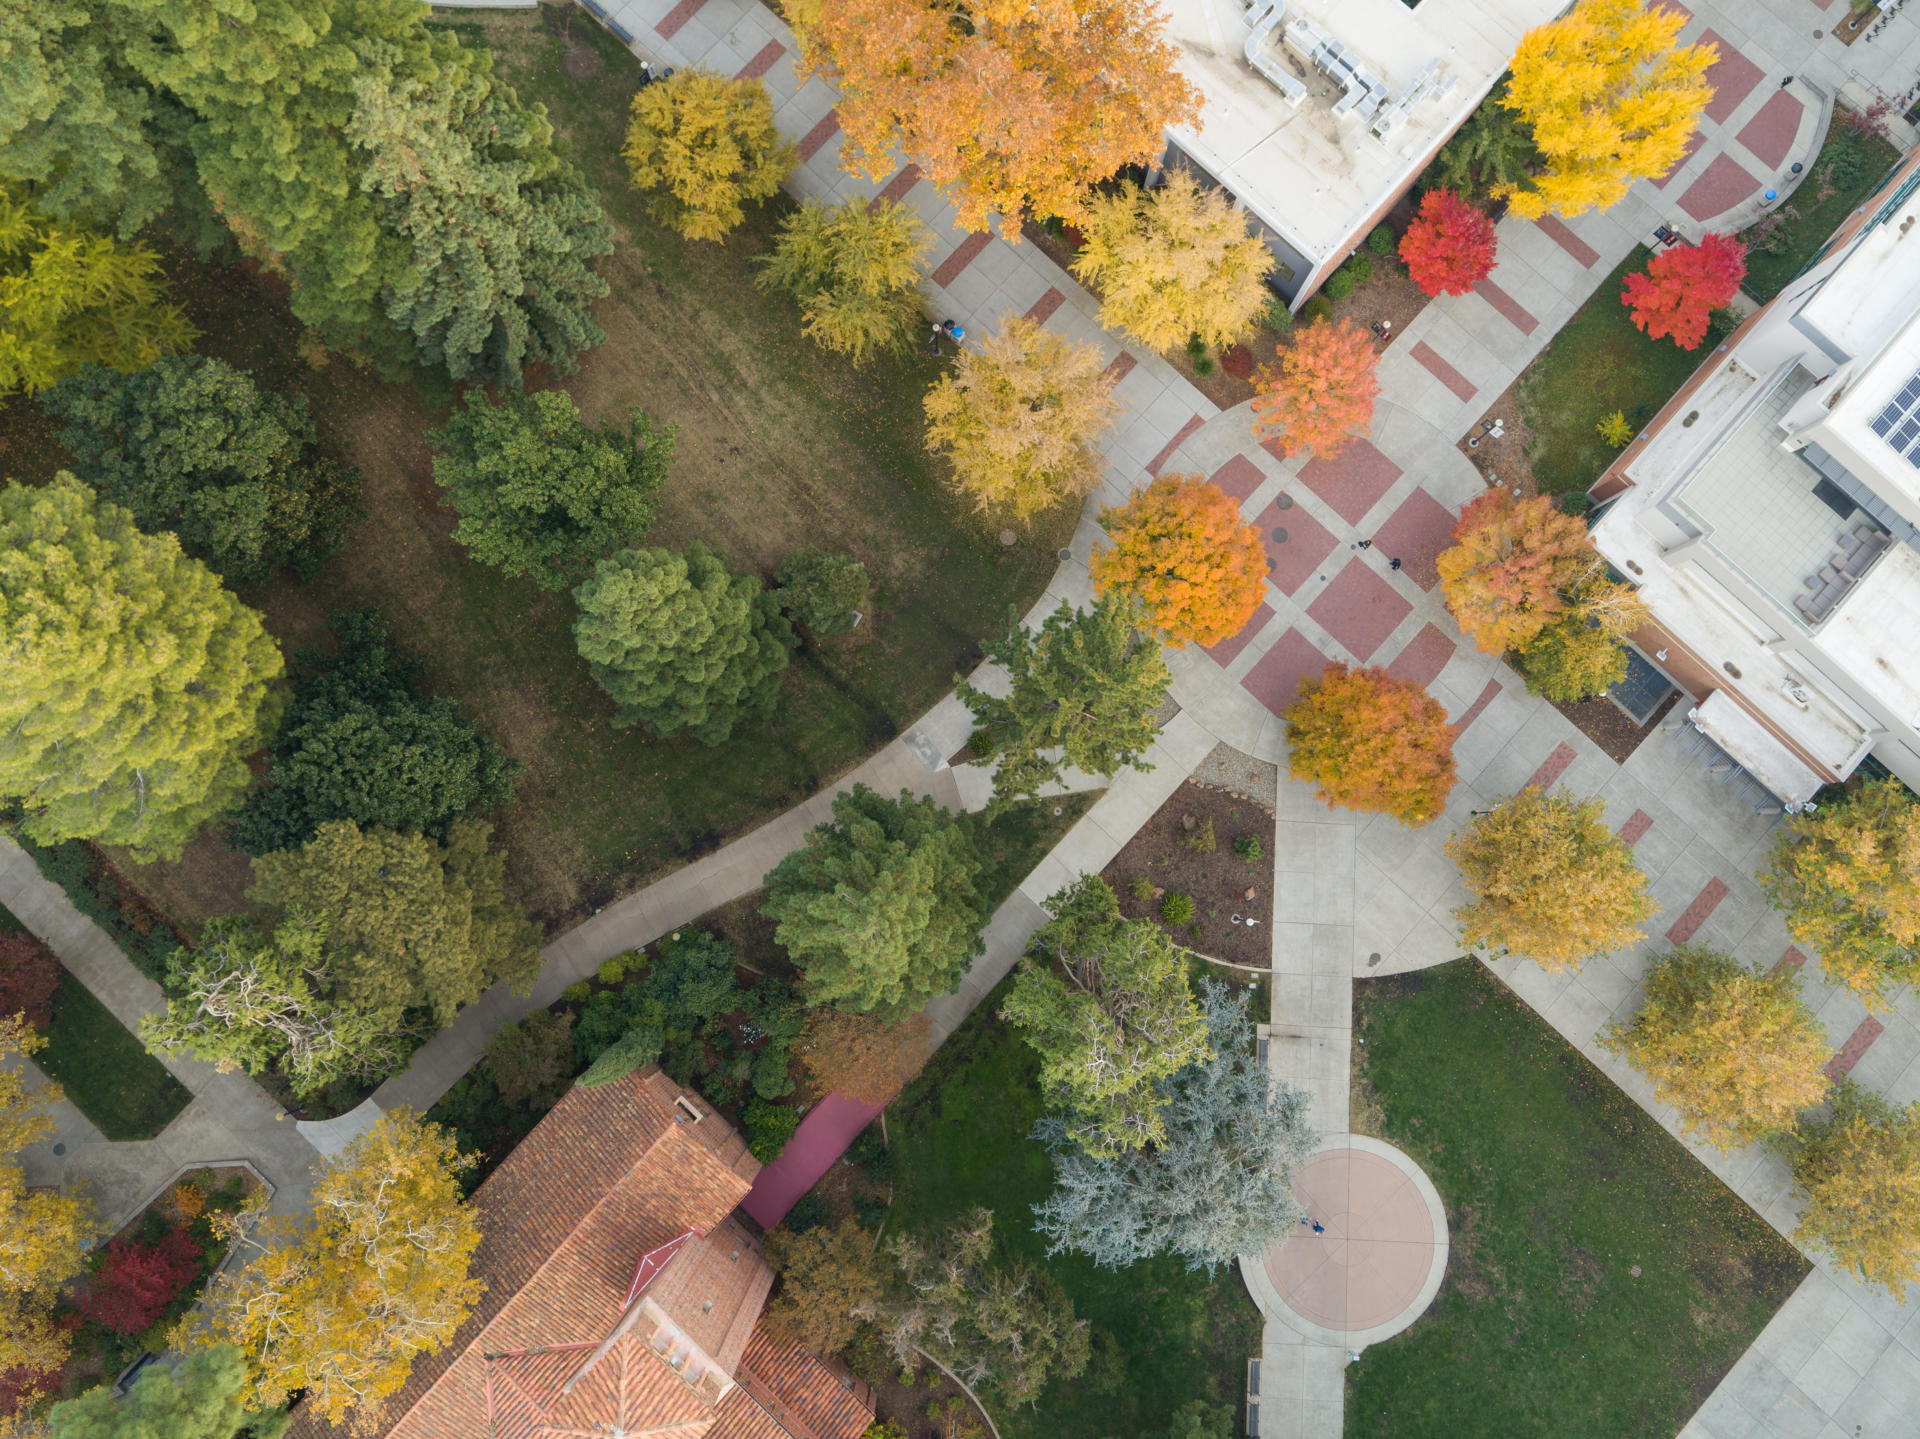 A college campus' trees and walkways as seen from a drone high above